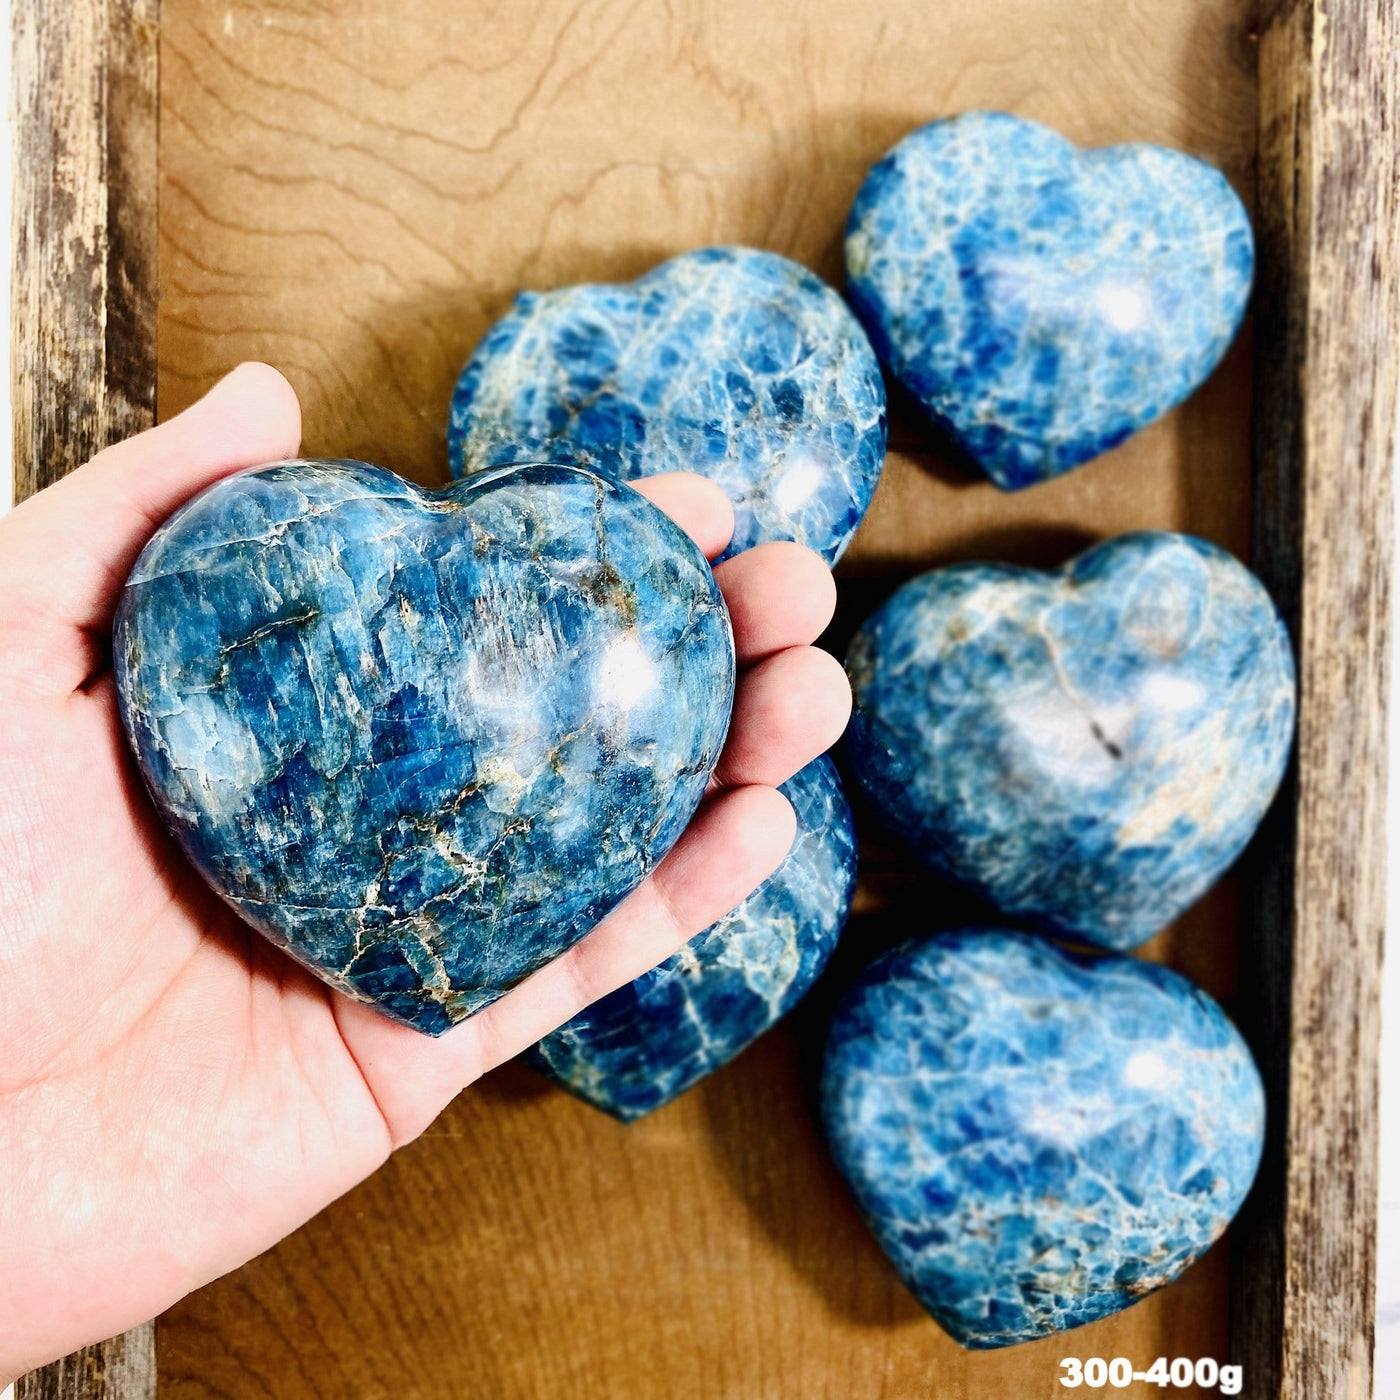 Blue Apatite Polished Hearts in hand by weight 300-400g